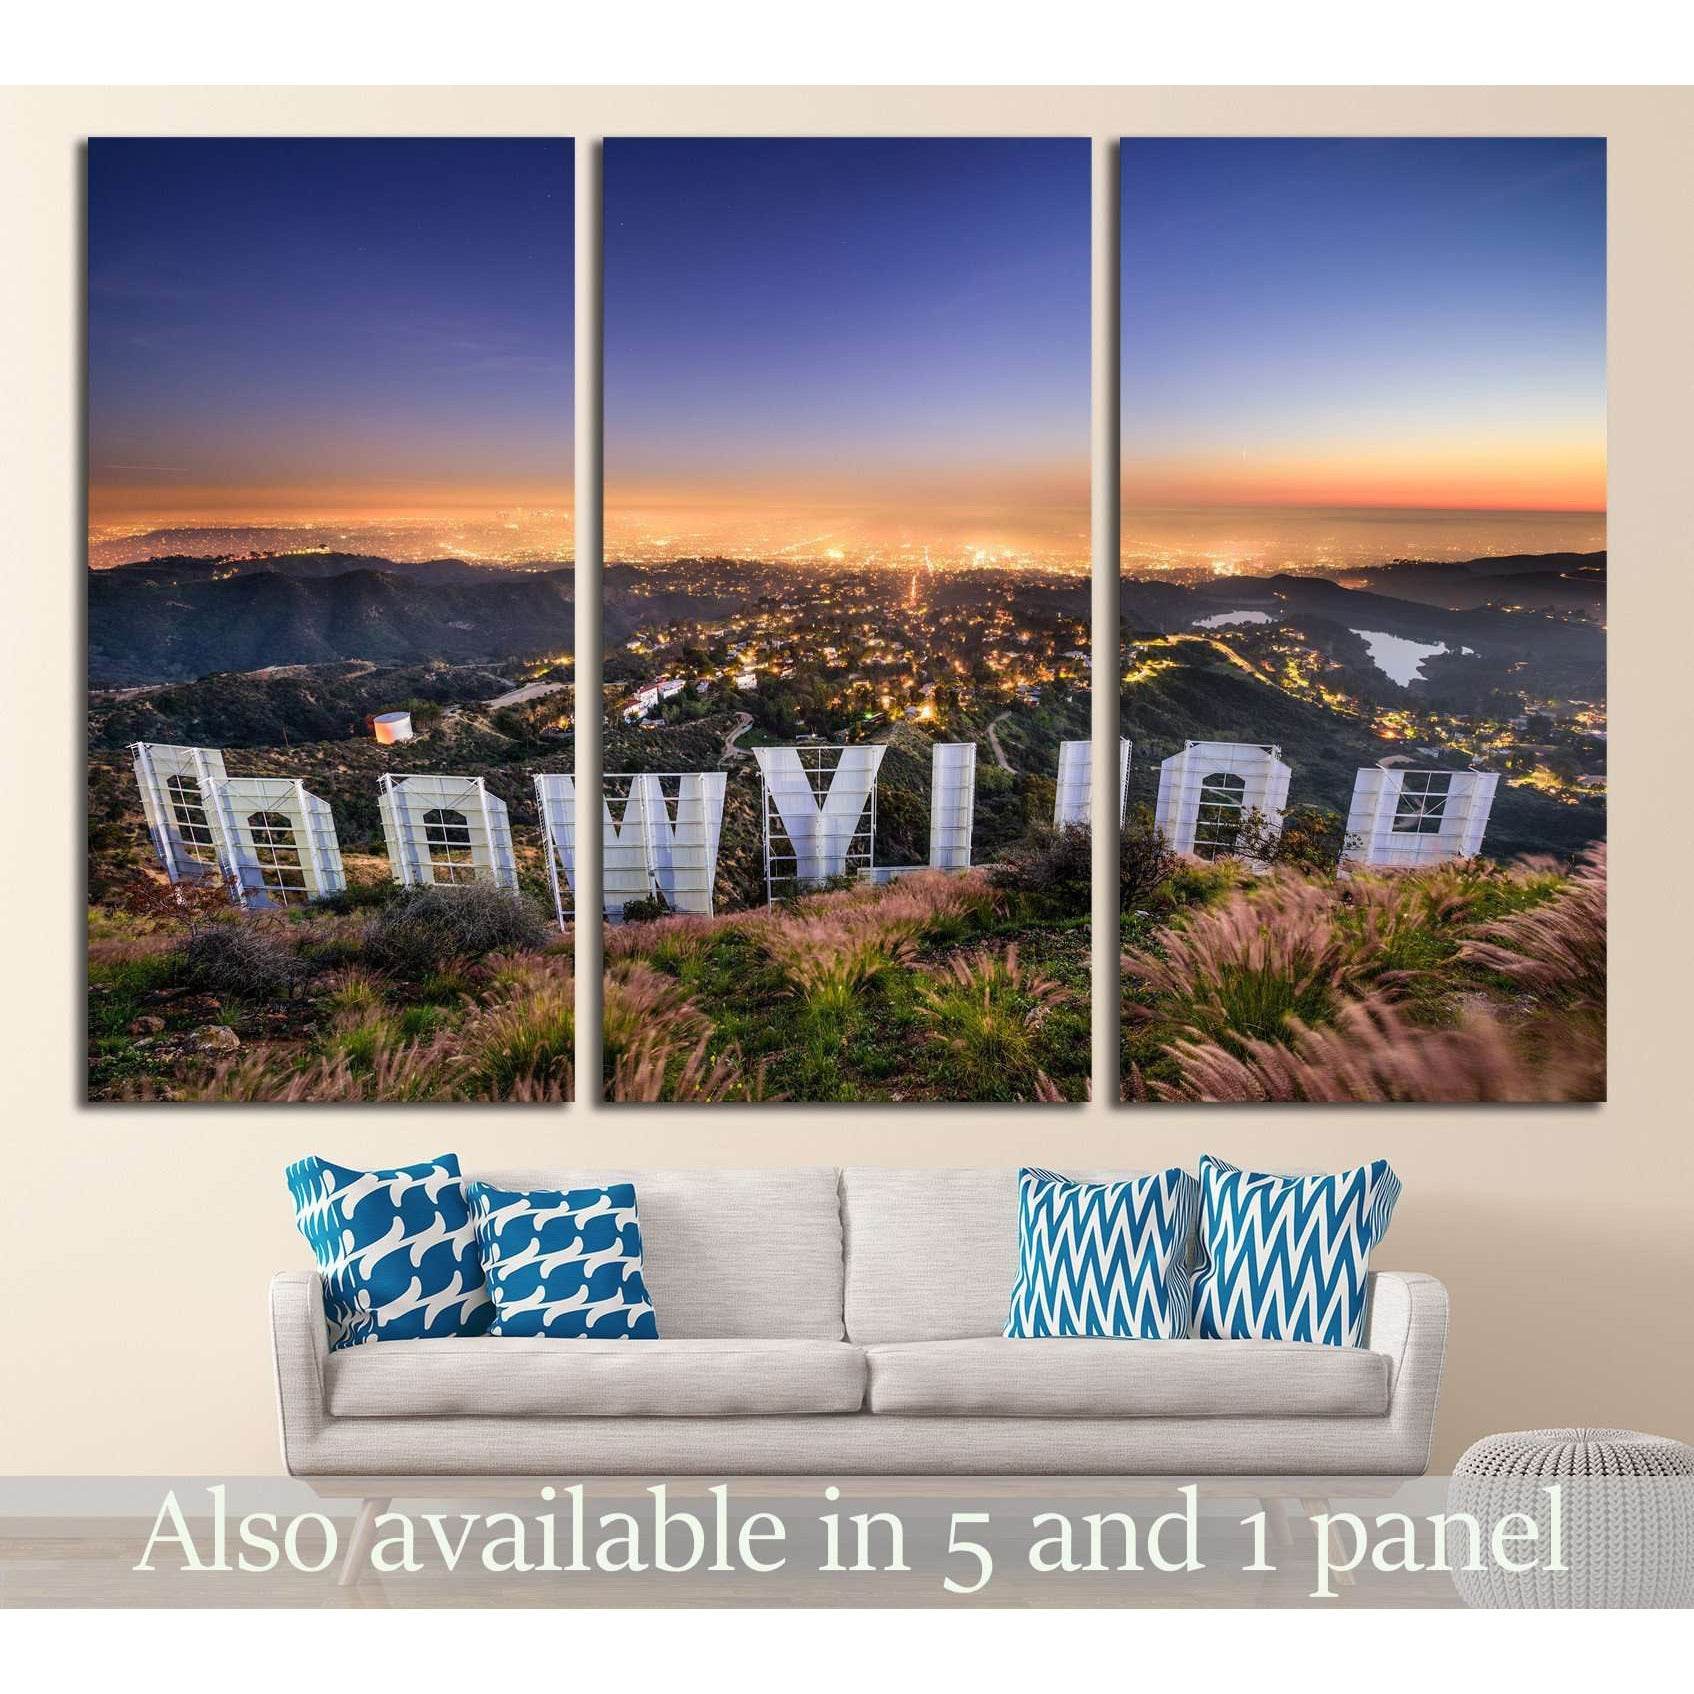 The Hollywood sign, LOS ANGELES, CALIFORNIA №1218 Ready to Hang Canvas Print